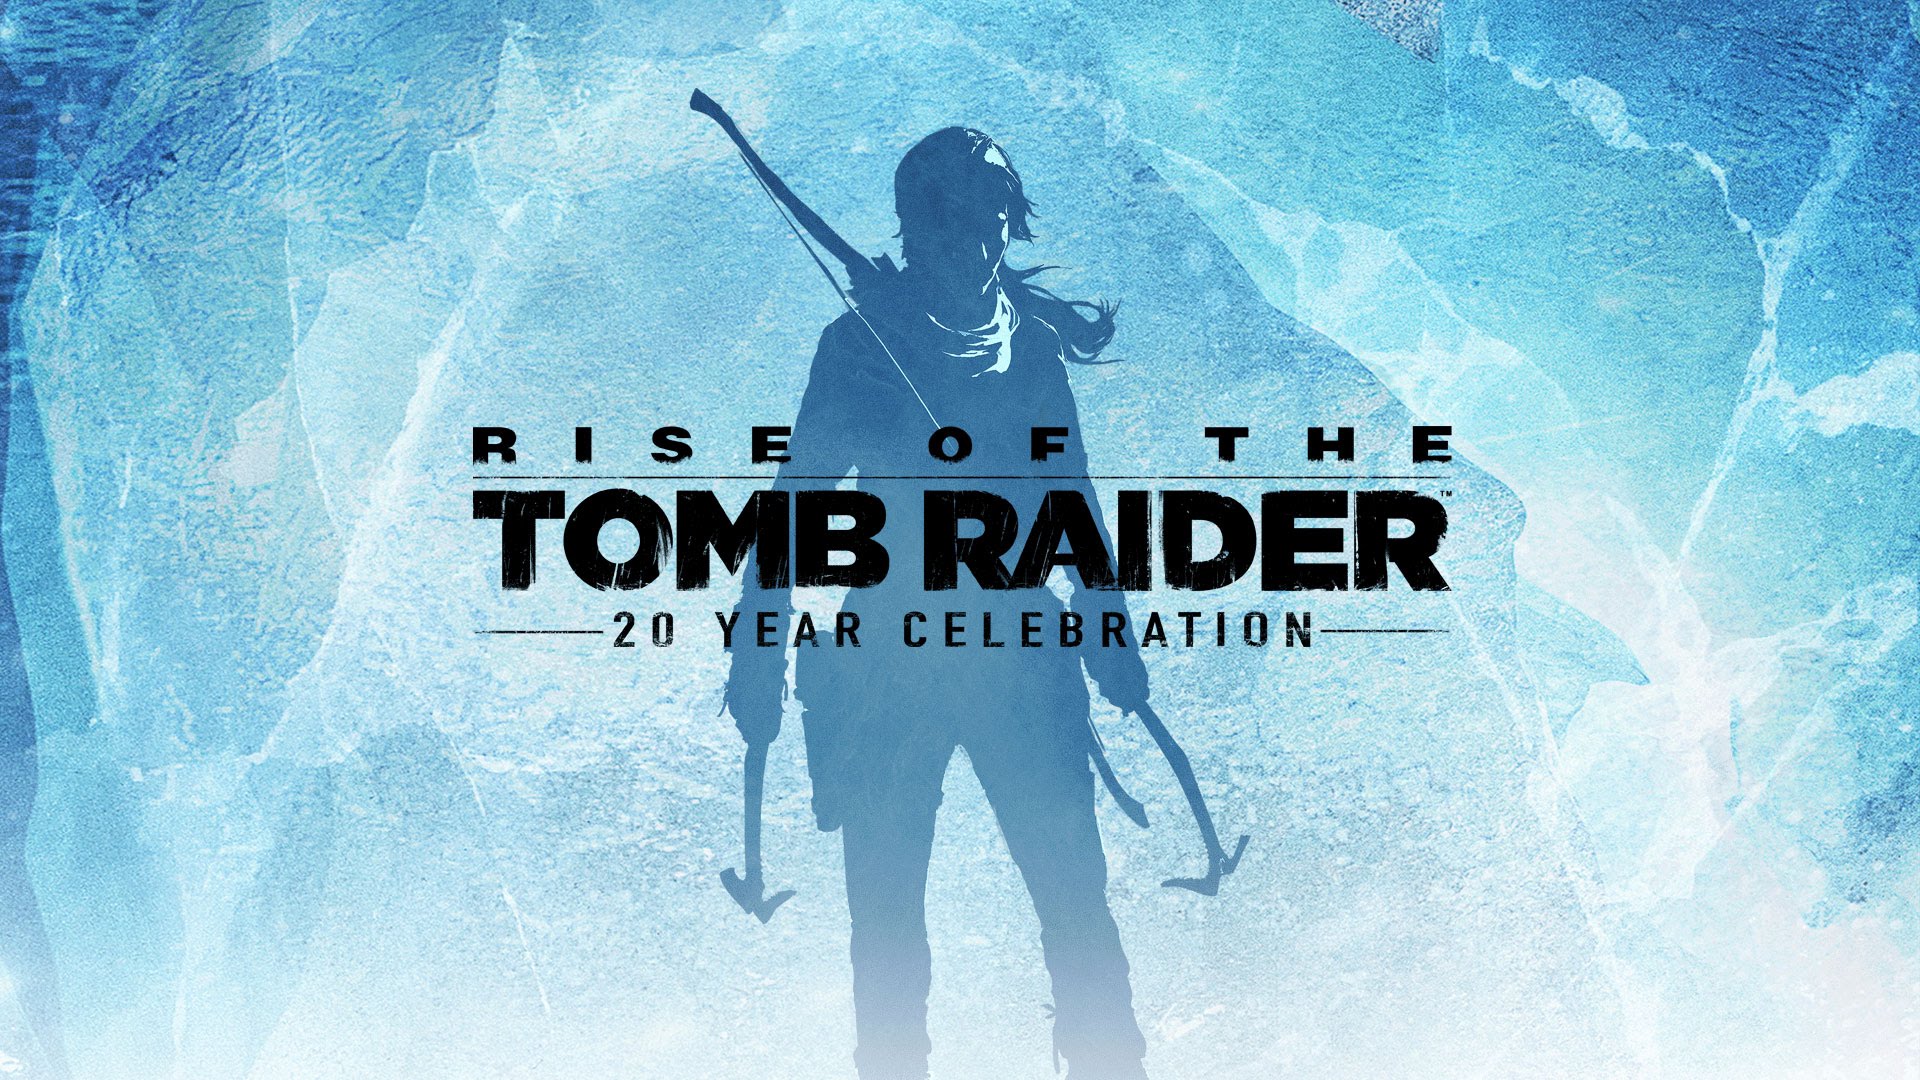 Rise of the Tomb Raider: "Blood Ties" Announcement Trailer